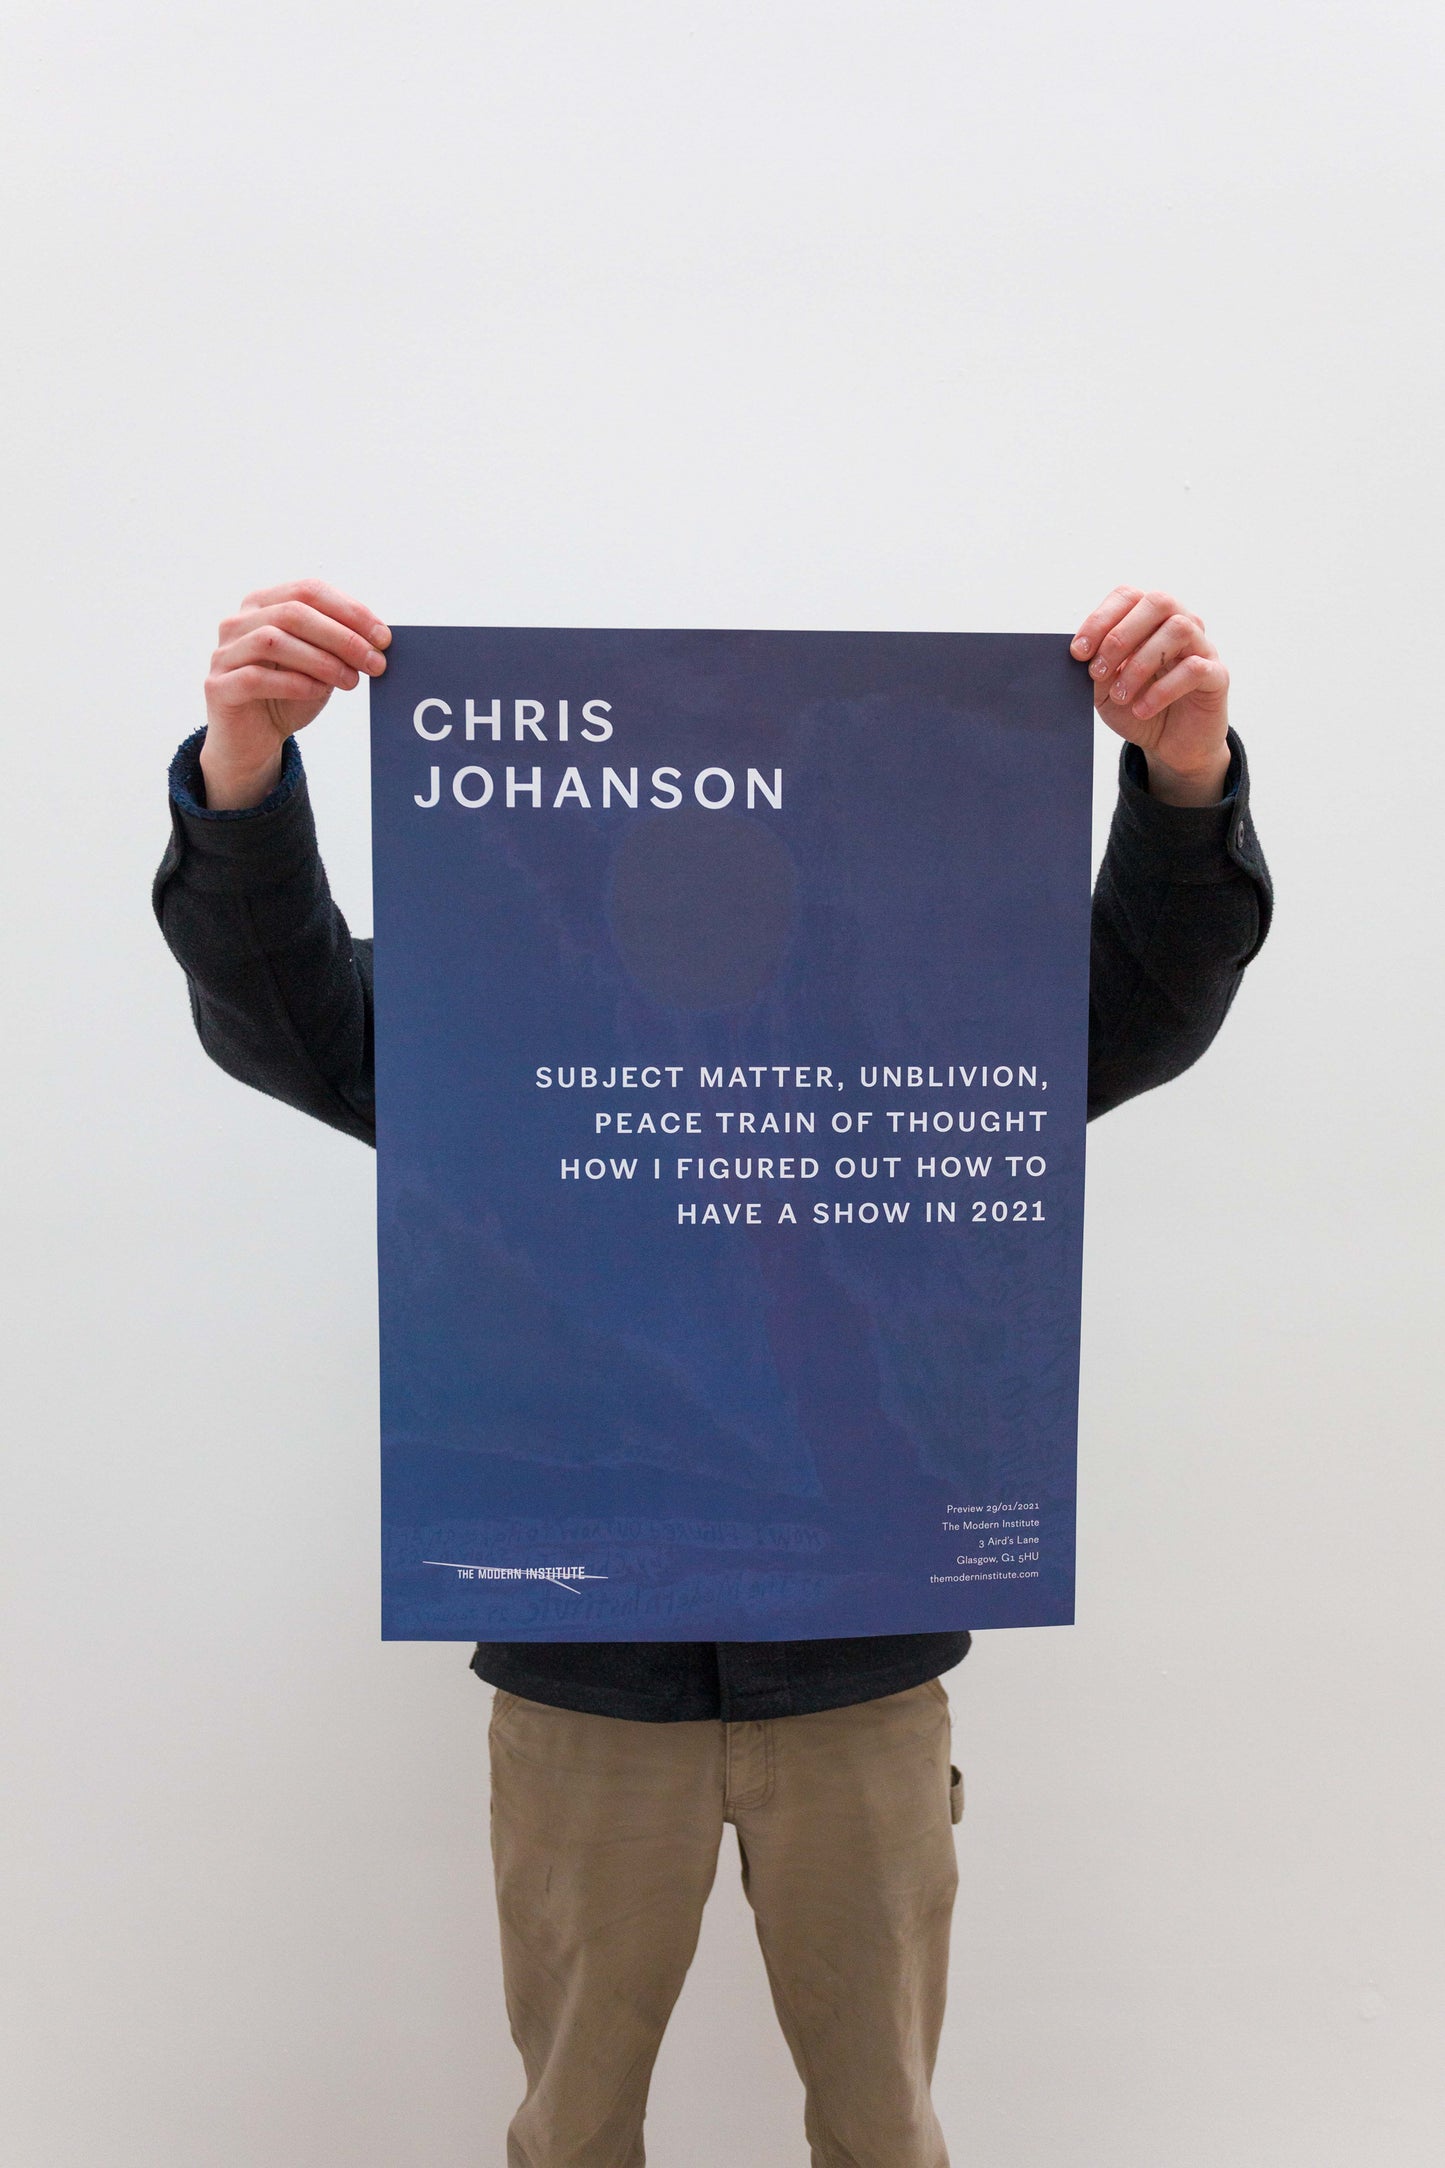 Chris Johanson - Subject Matter, Unblivion, Peace Train of Thought How I Figured Out How To Have A Show In 2021